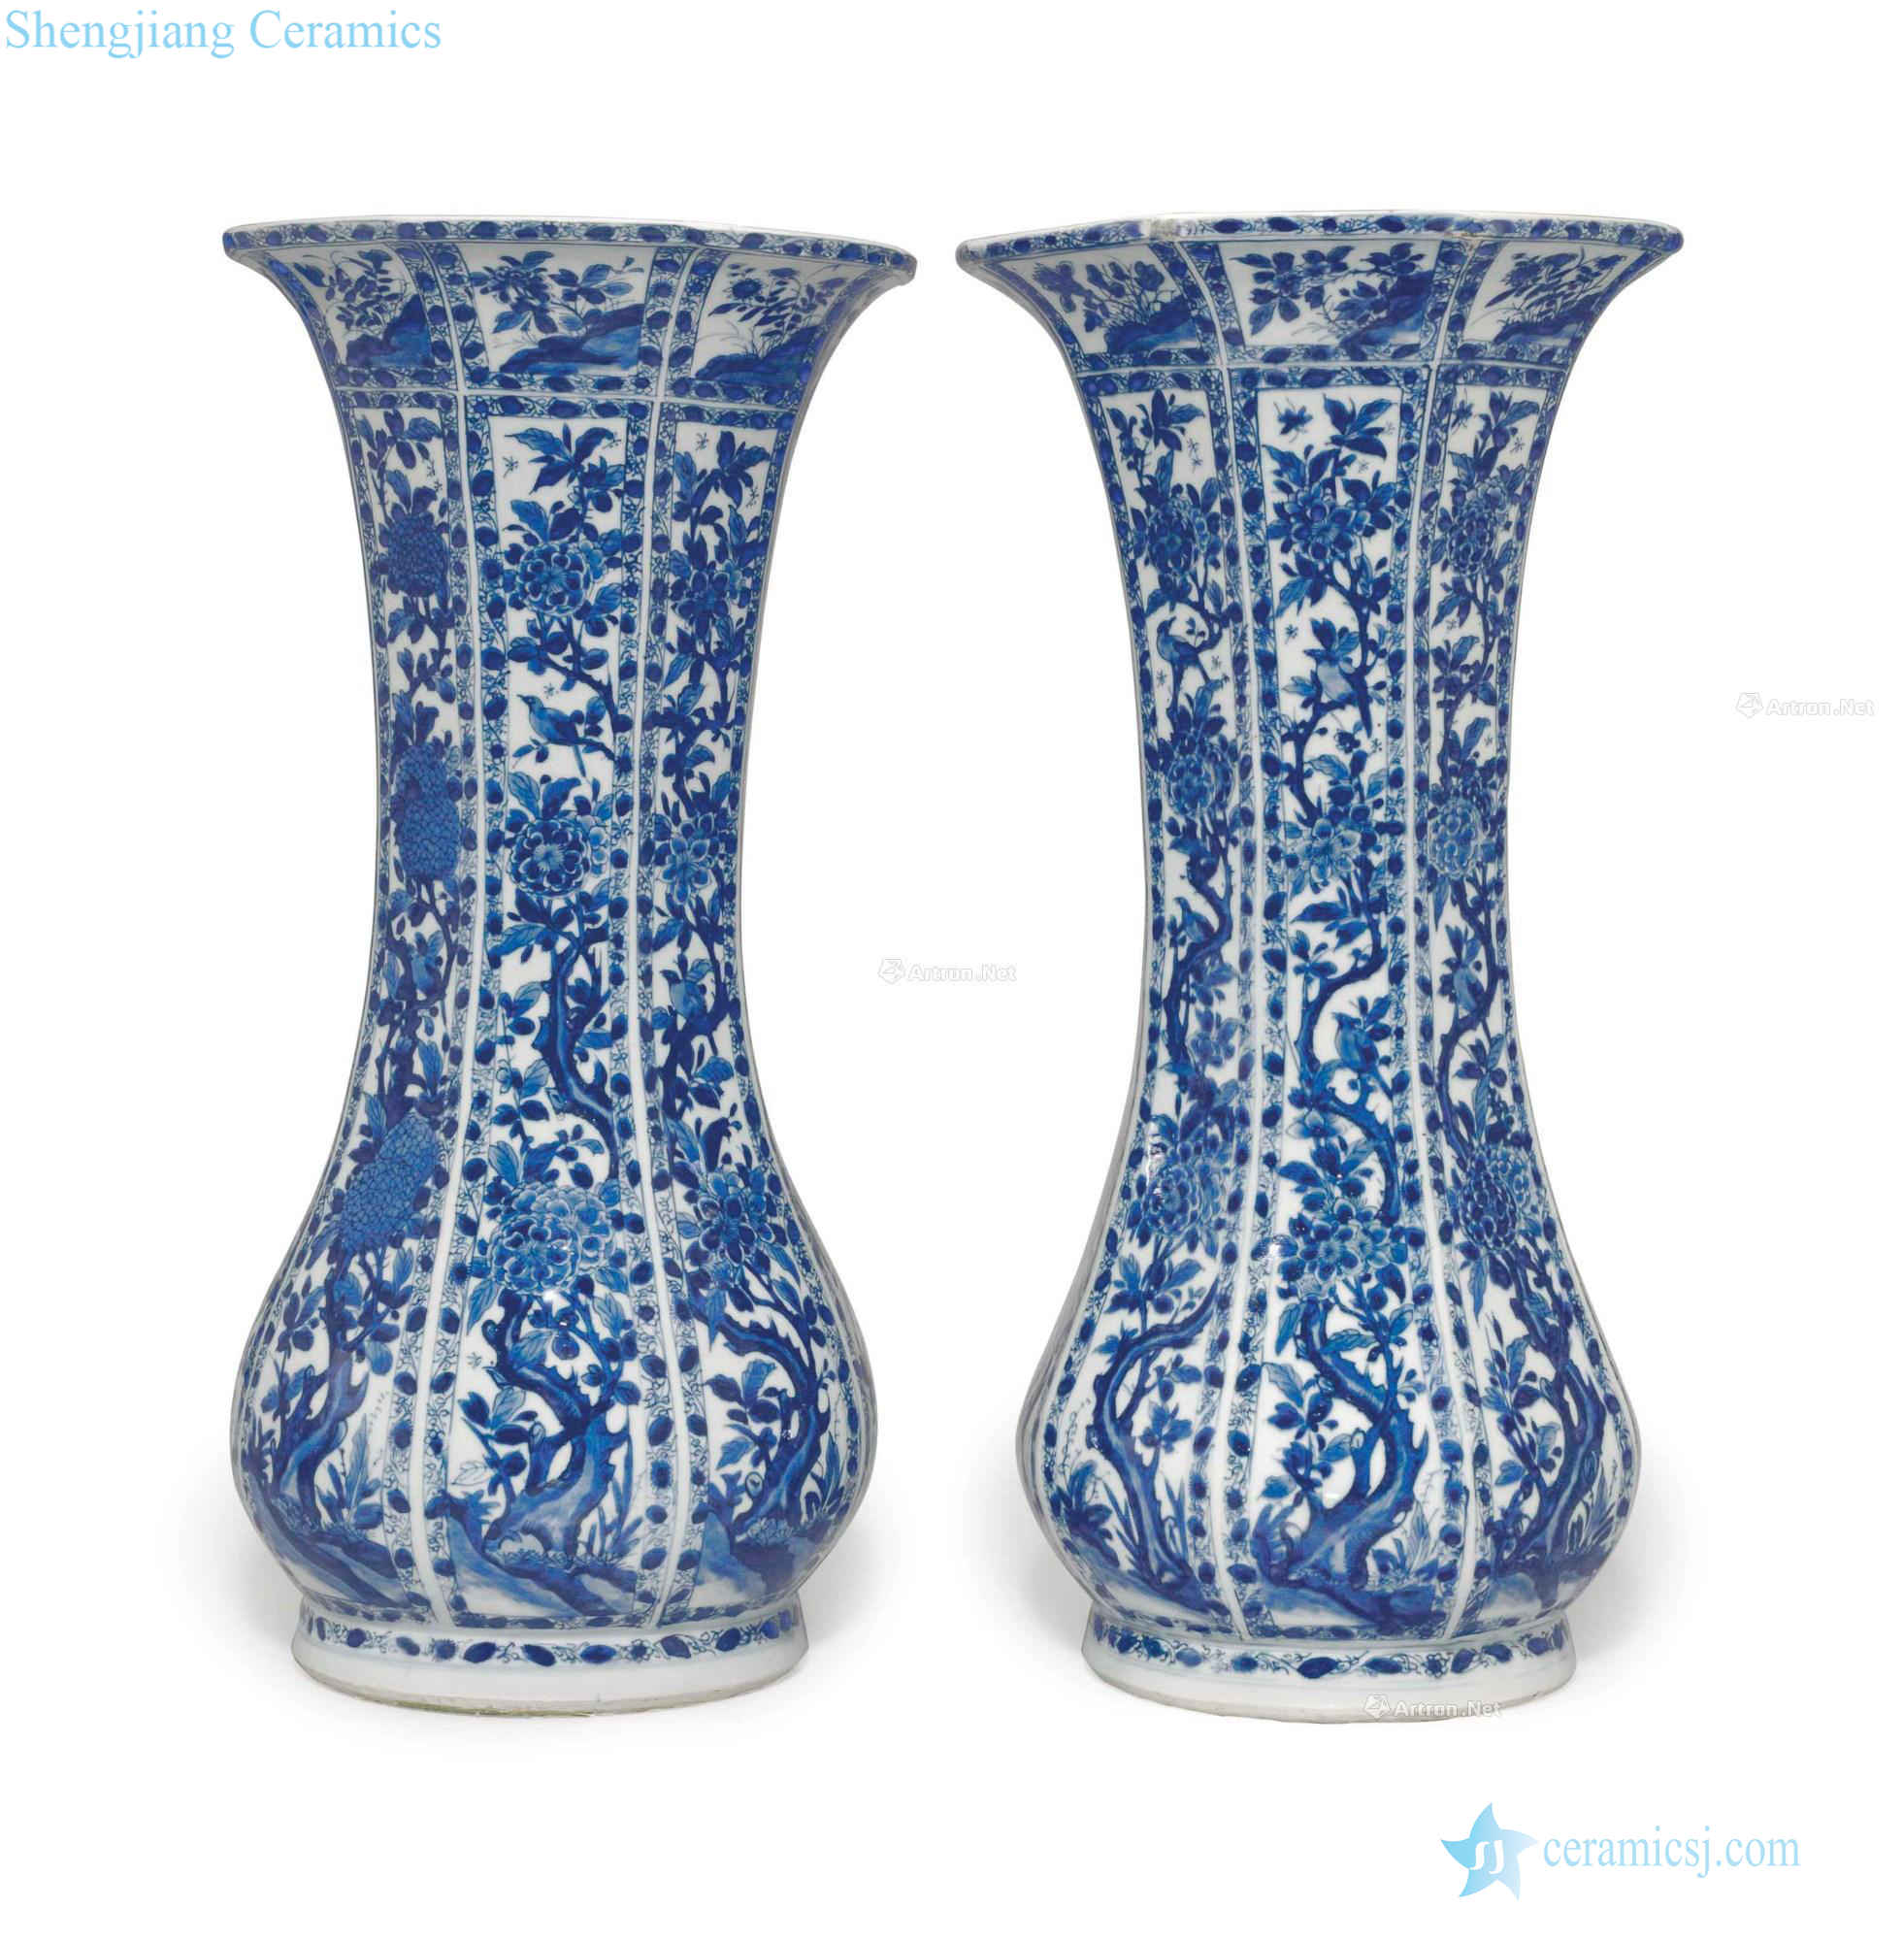 Kangxi period, 1662-1722, A LARGE PAIR OF BLUE AND WHITE OCTAGONAL BEAKER VASES